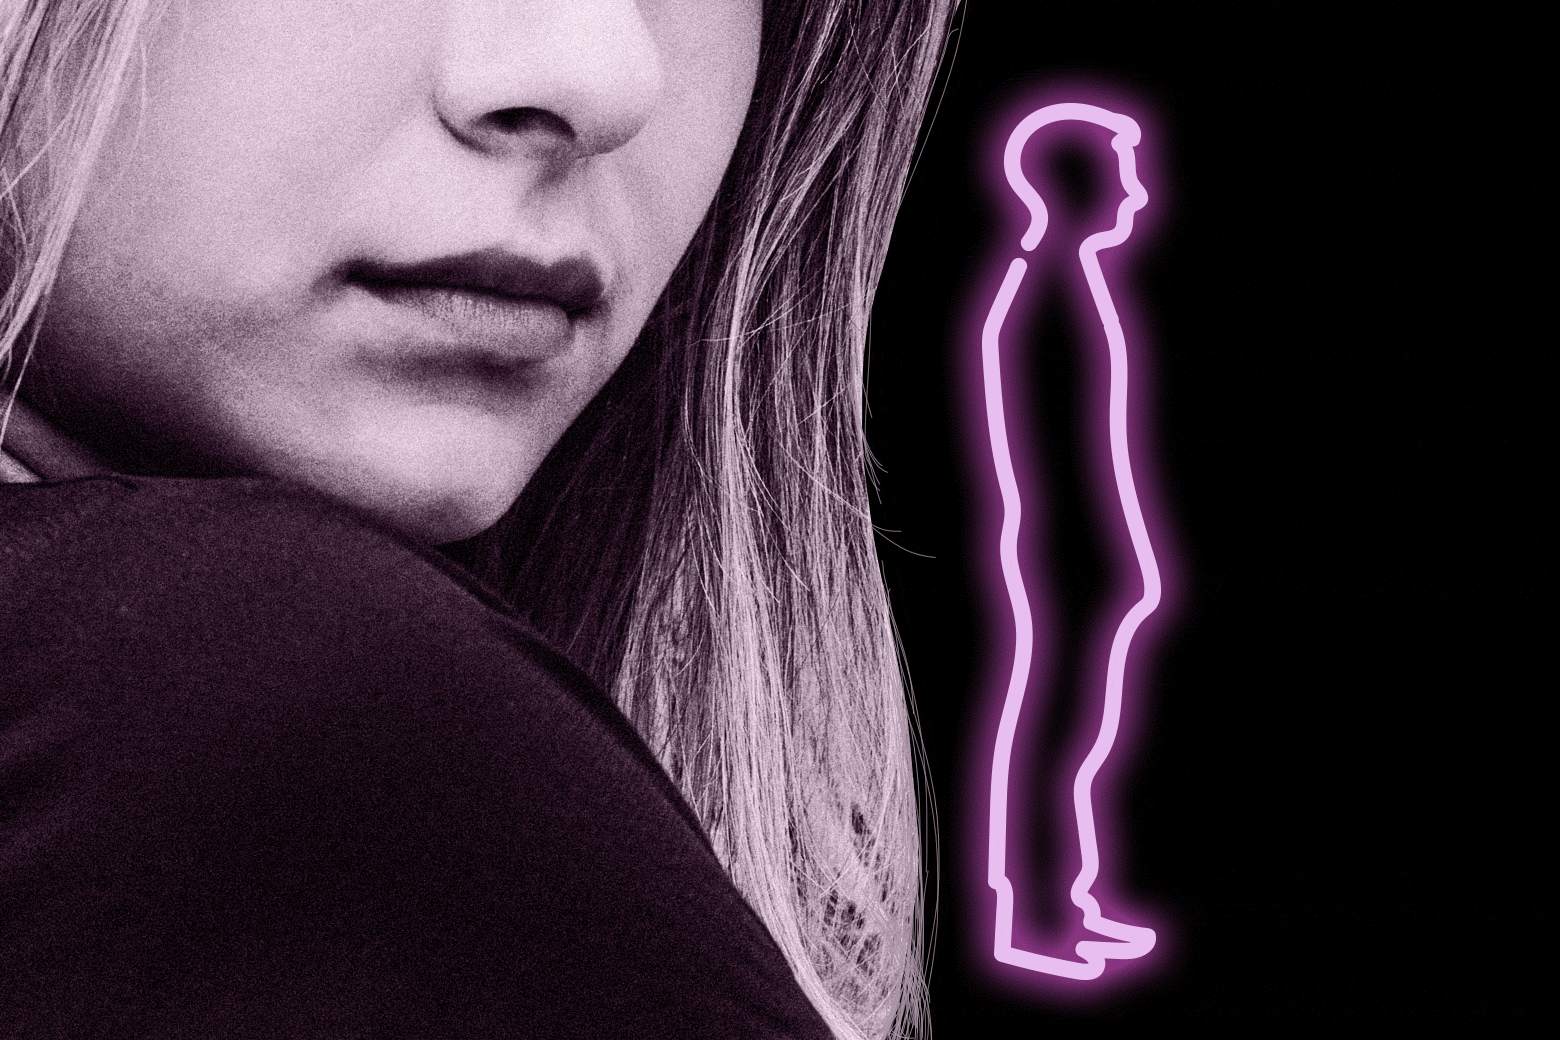 My teenage daughter is having sex. Should I tell her dad?